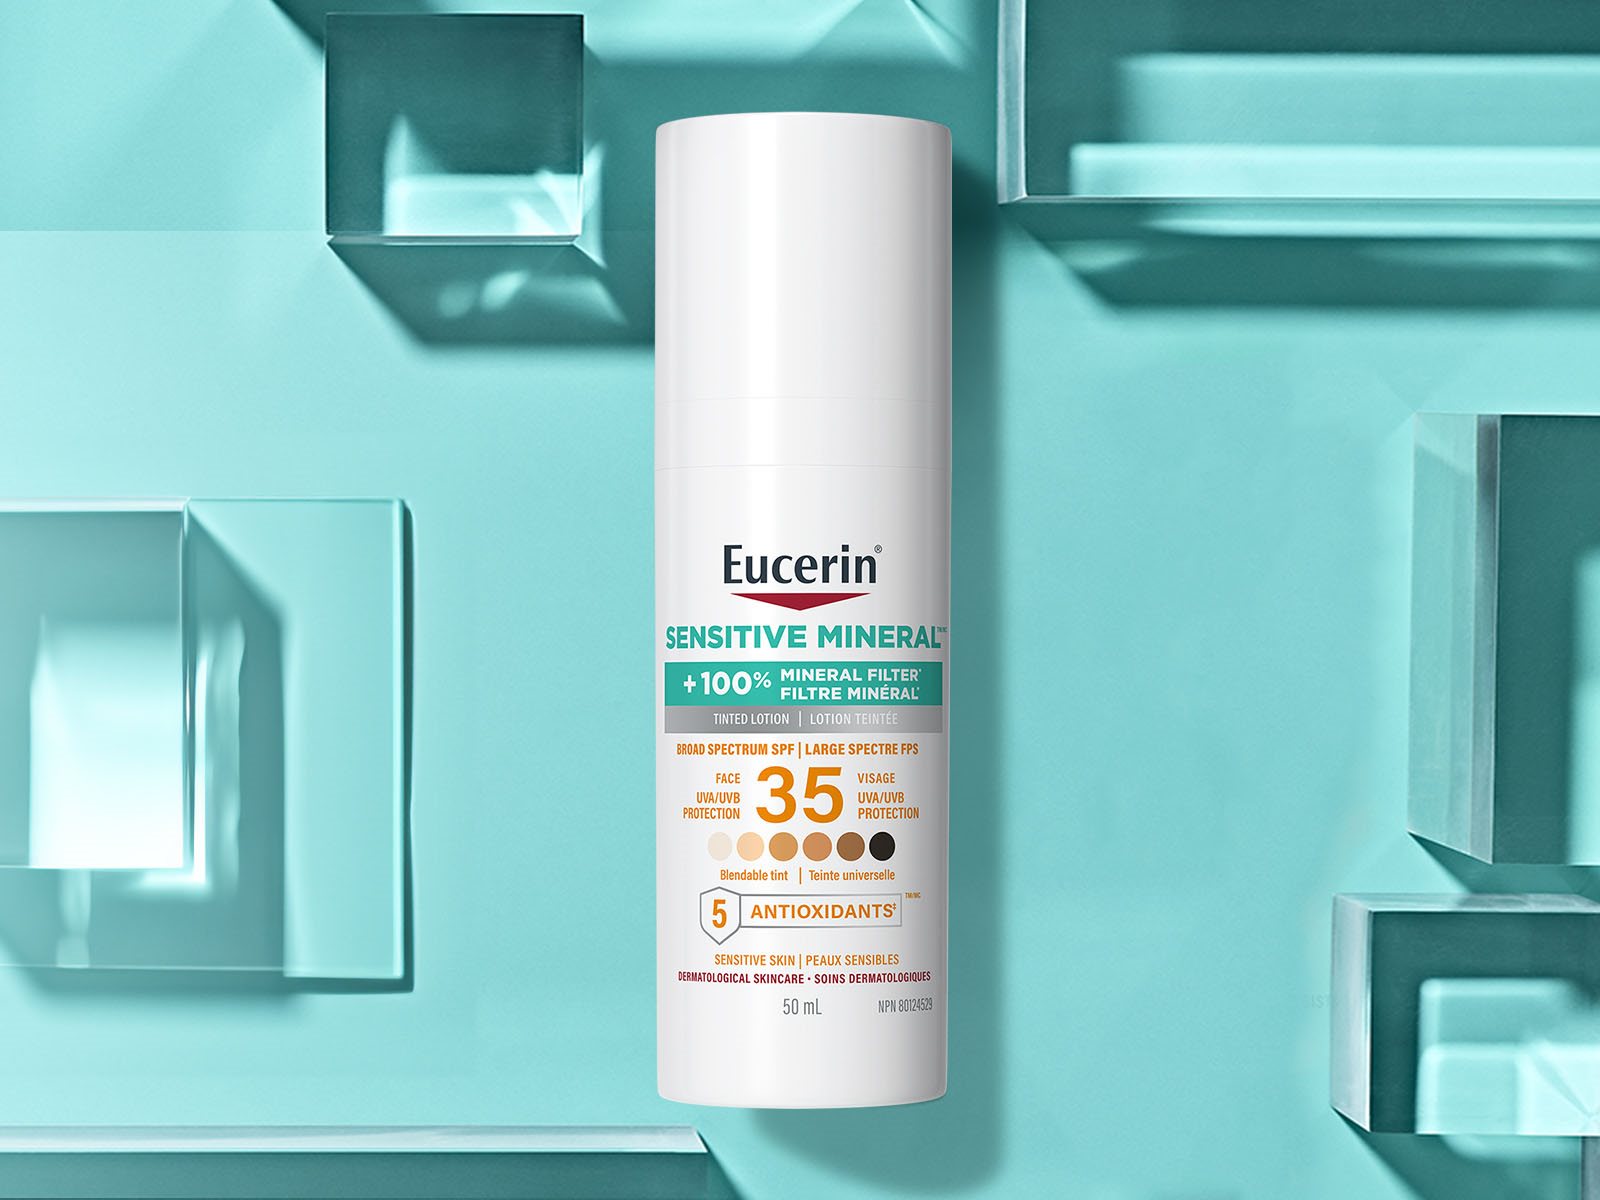 A view of a Eucerin Sensitive Mineral Tinted SPF 35 Face Sunscreen Lotion product against a turquoise background.